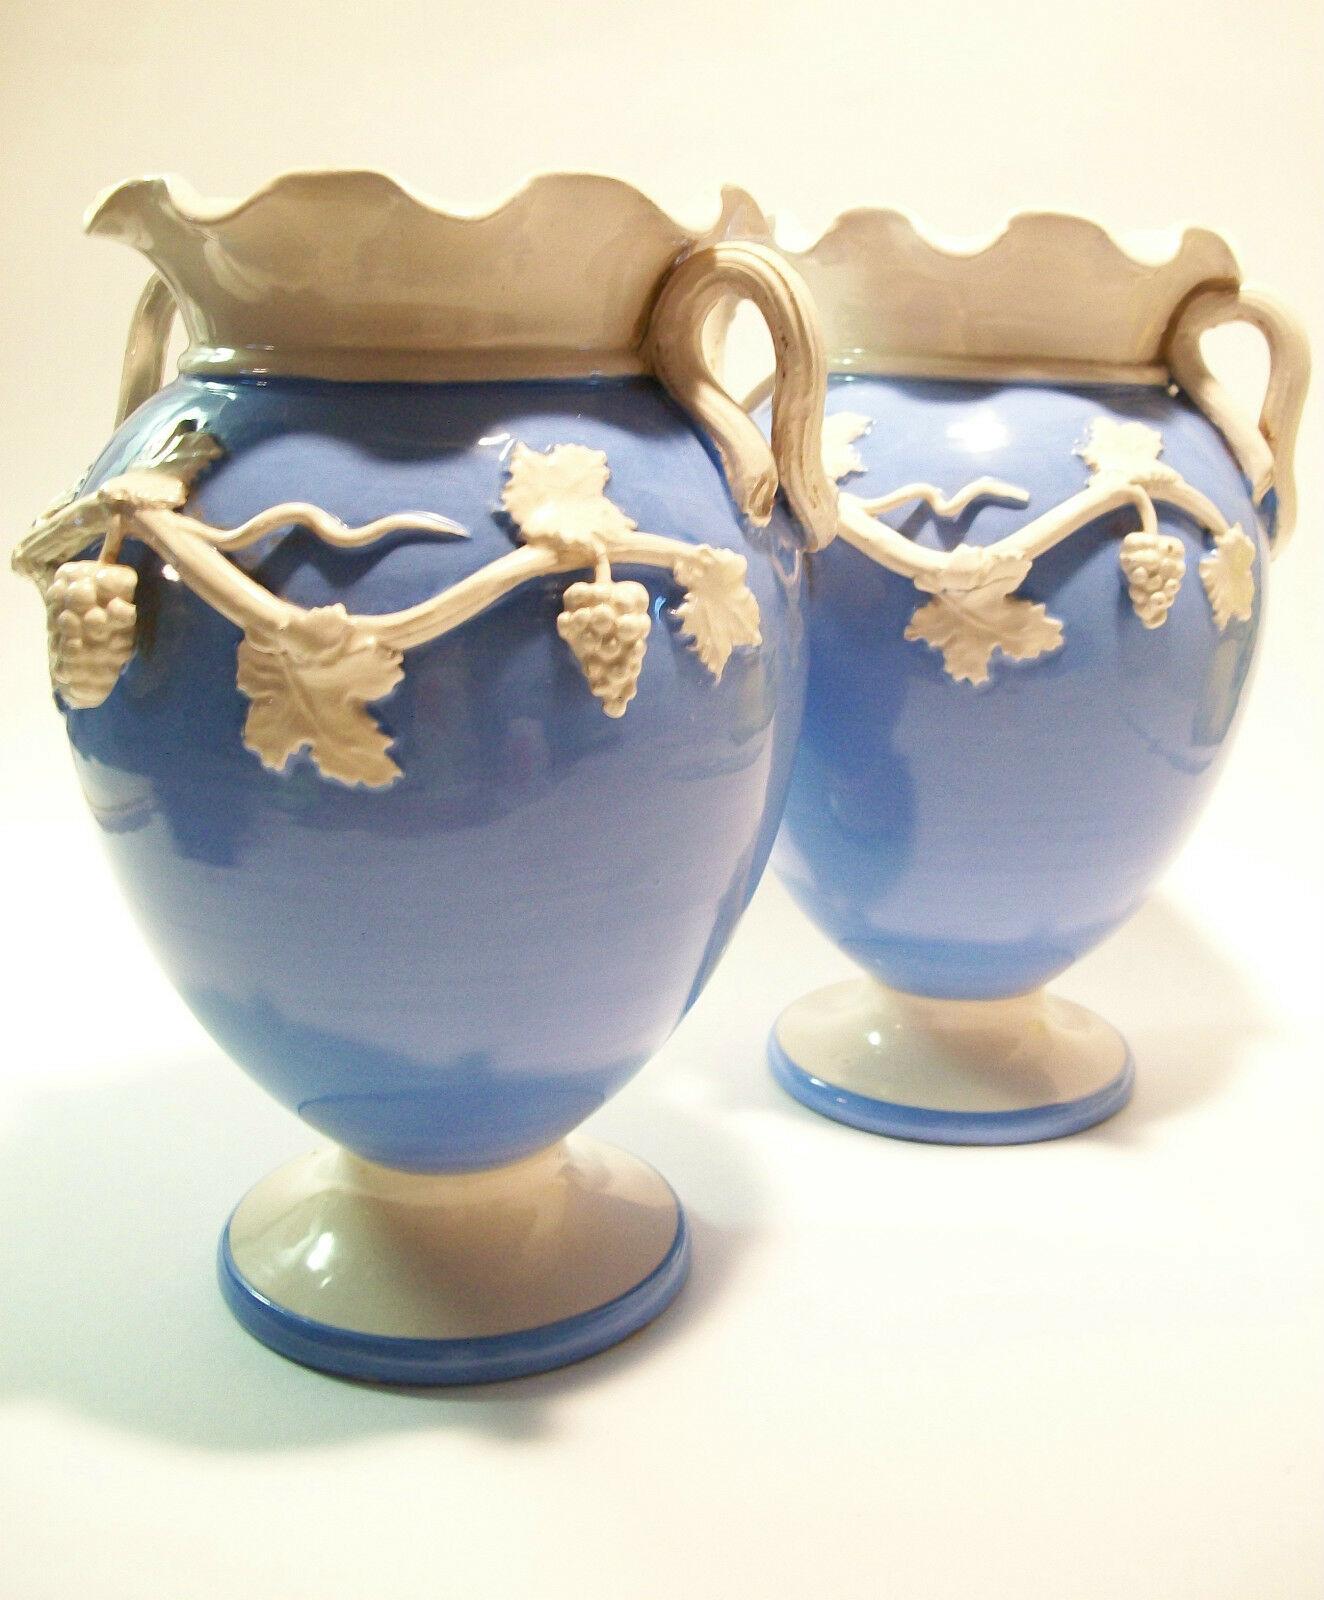 UGO ZACCAGNINI - Vintage exceptional pair of twin handled Italian studio pottery majolica vases - wheel thrown with hand modeled and applied 'grapes' decoration - leaves and vines forming the handles - each vase unique - each signed with a 'Z' and